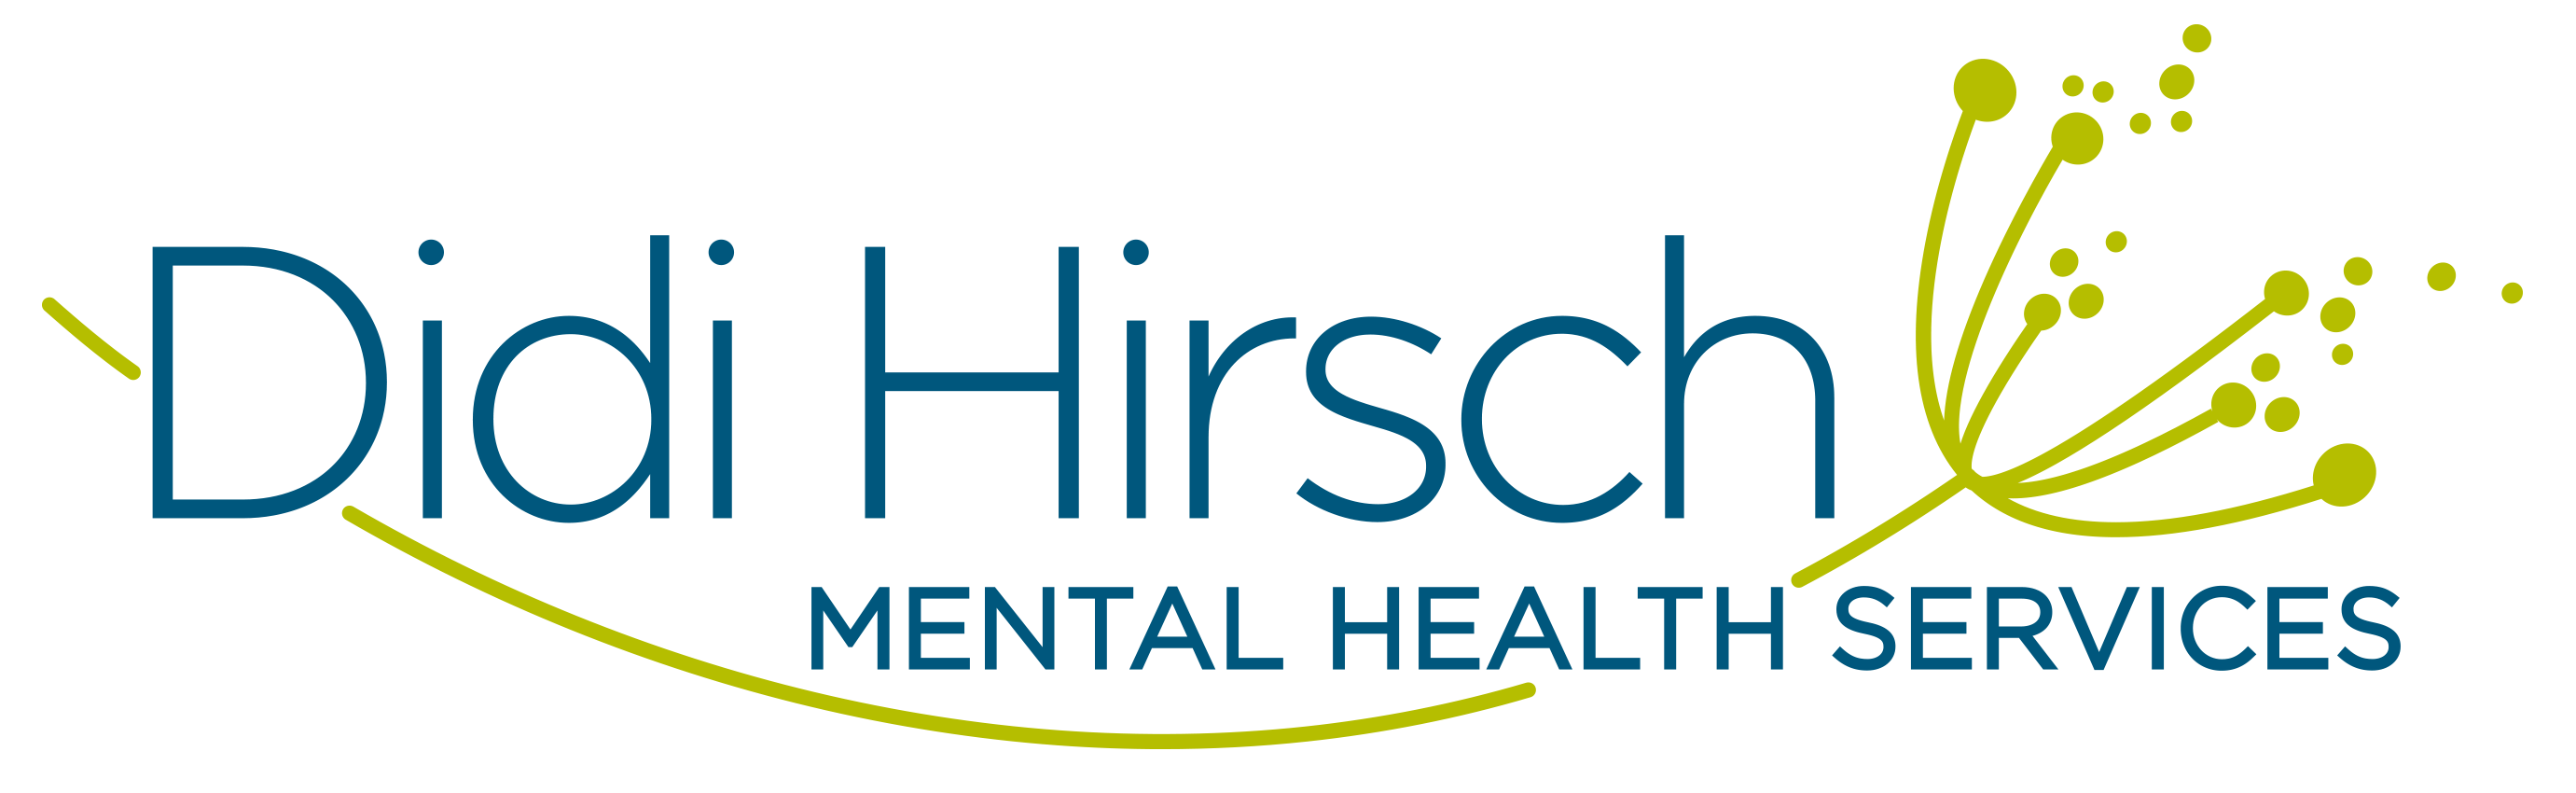 Didi Hirsch Mental Health Services Highlights Tips and Resources to Prevent Suicide During National Awareness Month in September